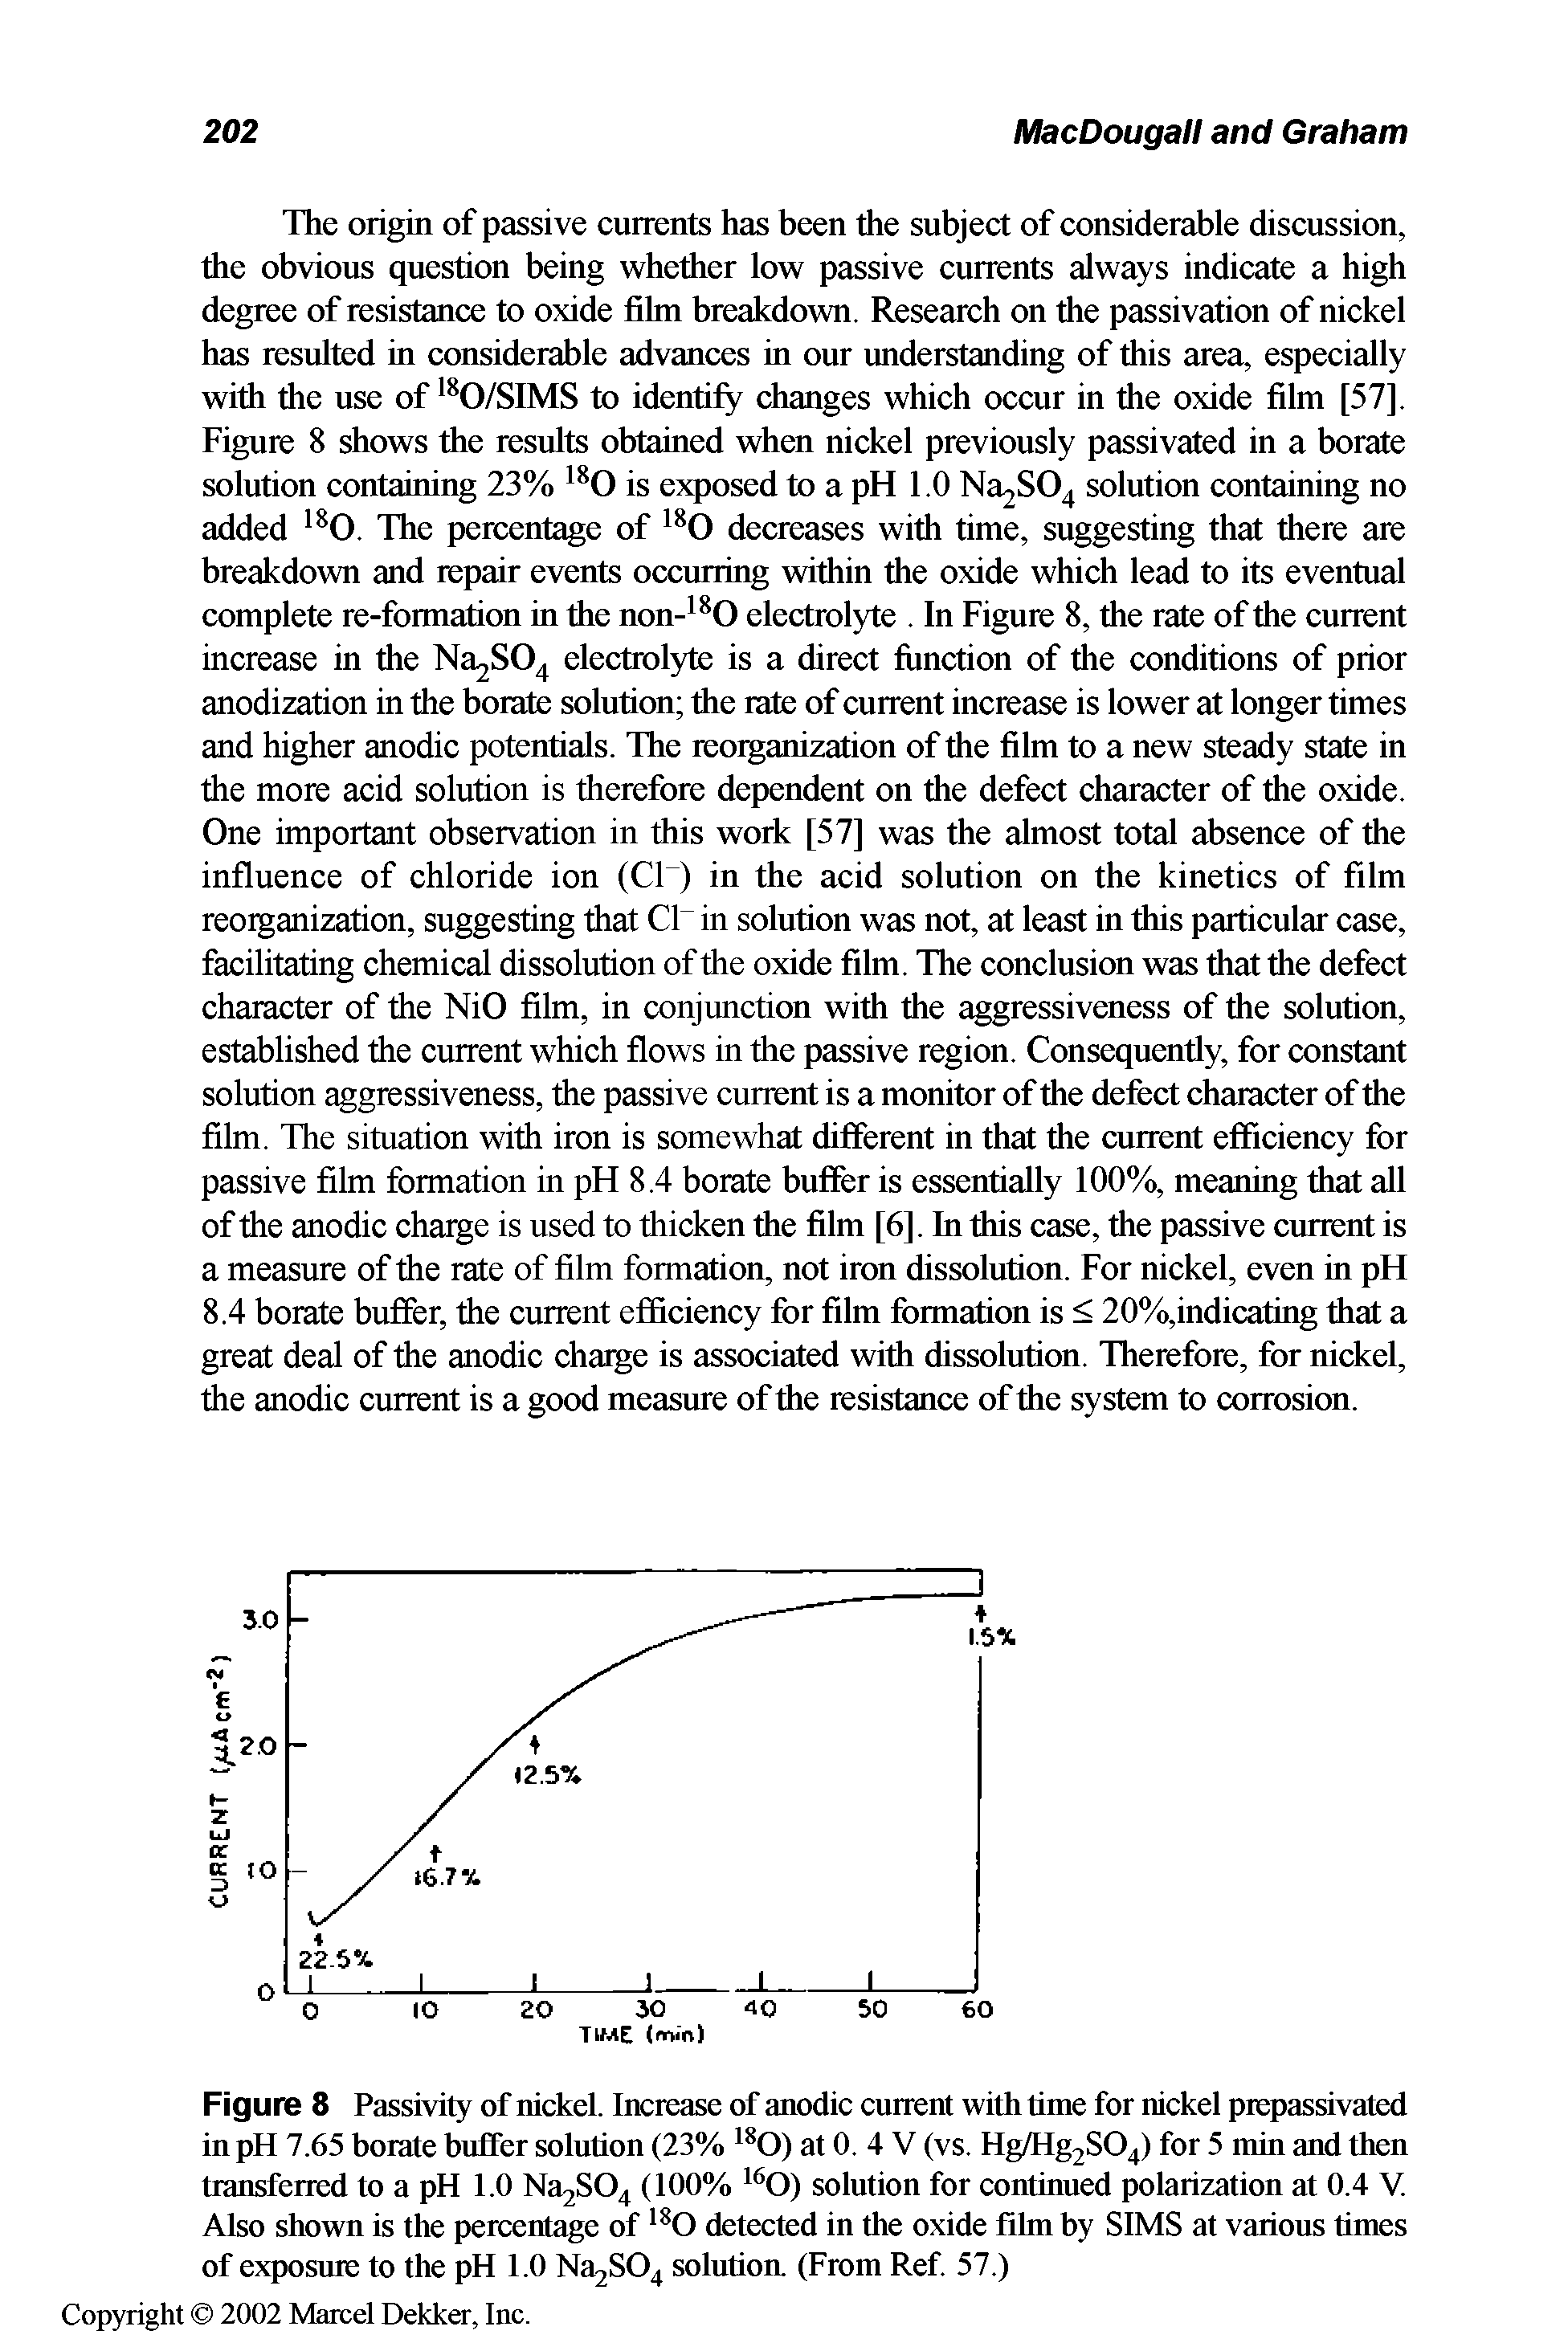 Figure 8 Passivity of nickel. Increase of anodic current with time for nickel prepassivated in pH 7.65 borate buffer solution (23% 0) at 0. 4 V (vs. Hg/Hg2S04) for 5 min and then transferred to a pH 1.0 Na2S04 (100% solution for continued polarization at 0.4 V. Also shown is the percentage of 0 detected in the oxide film by SIMS at various times of exposttre to the pH 1.0 Na2S04 solution. (From Ref 57.)...